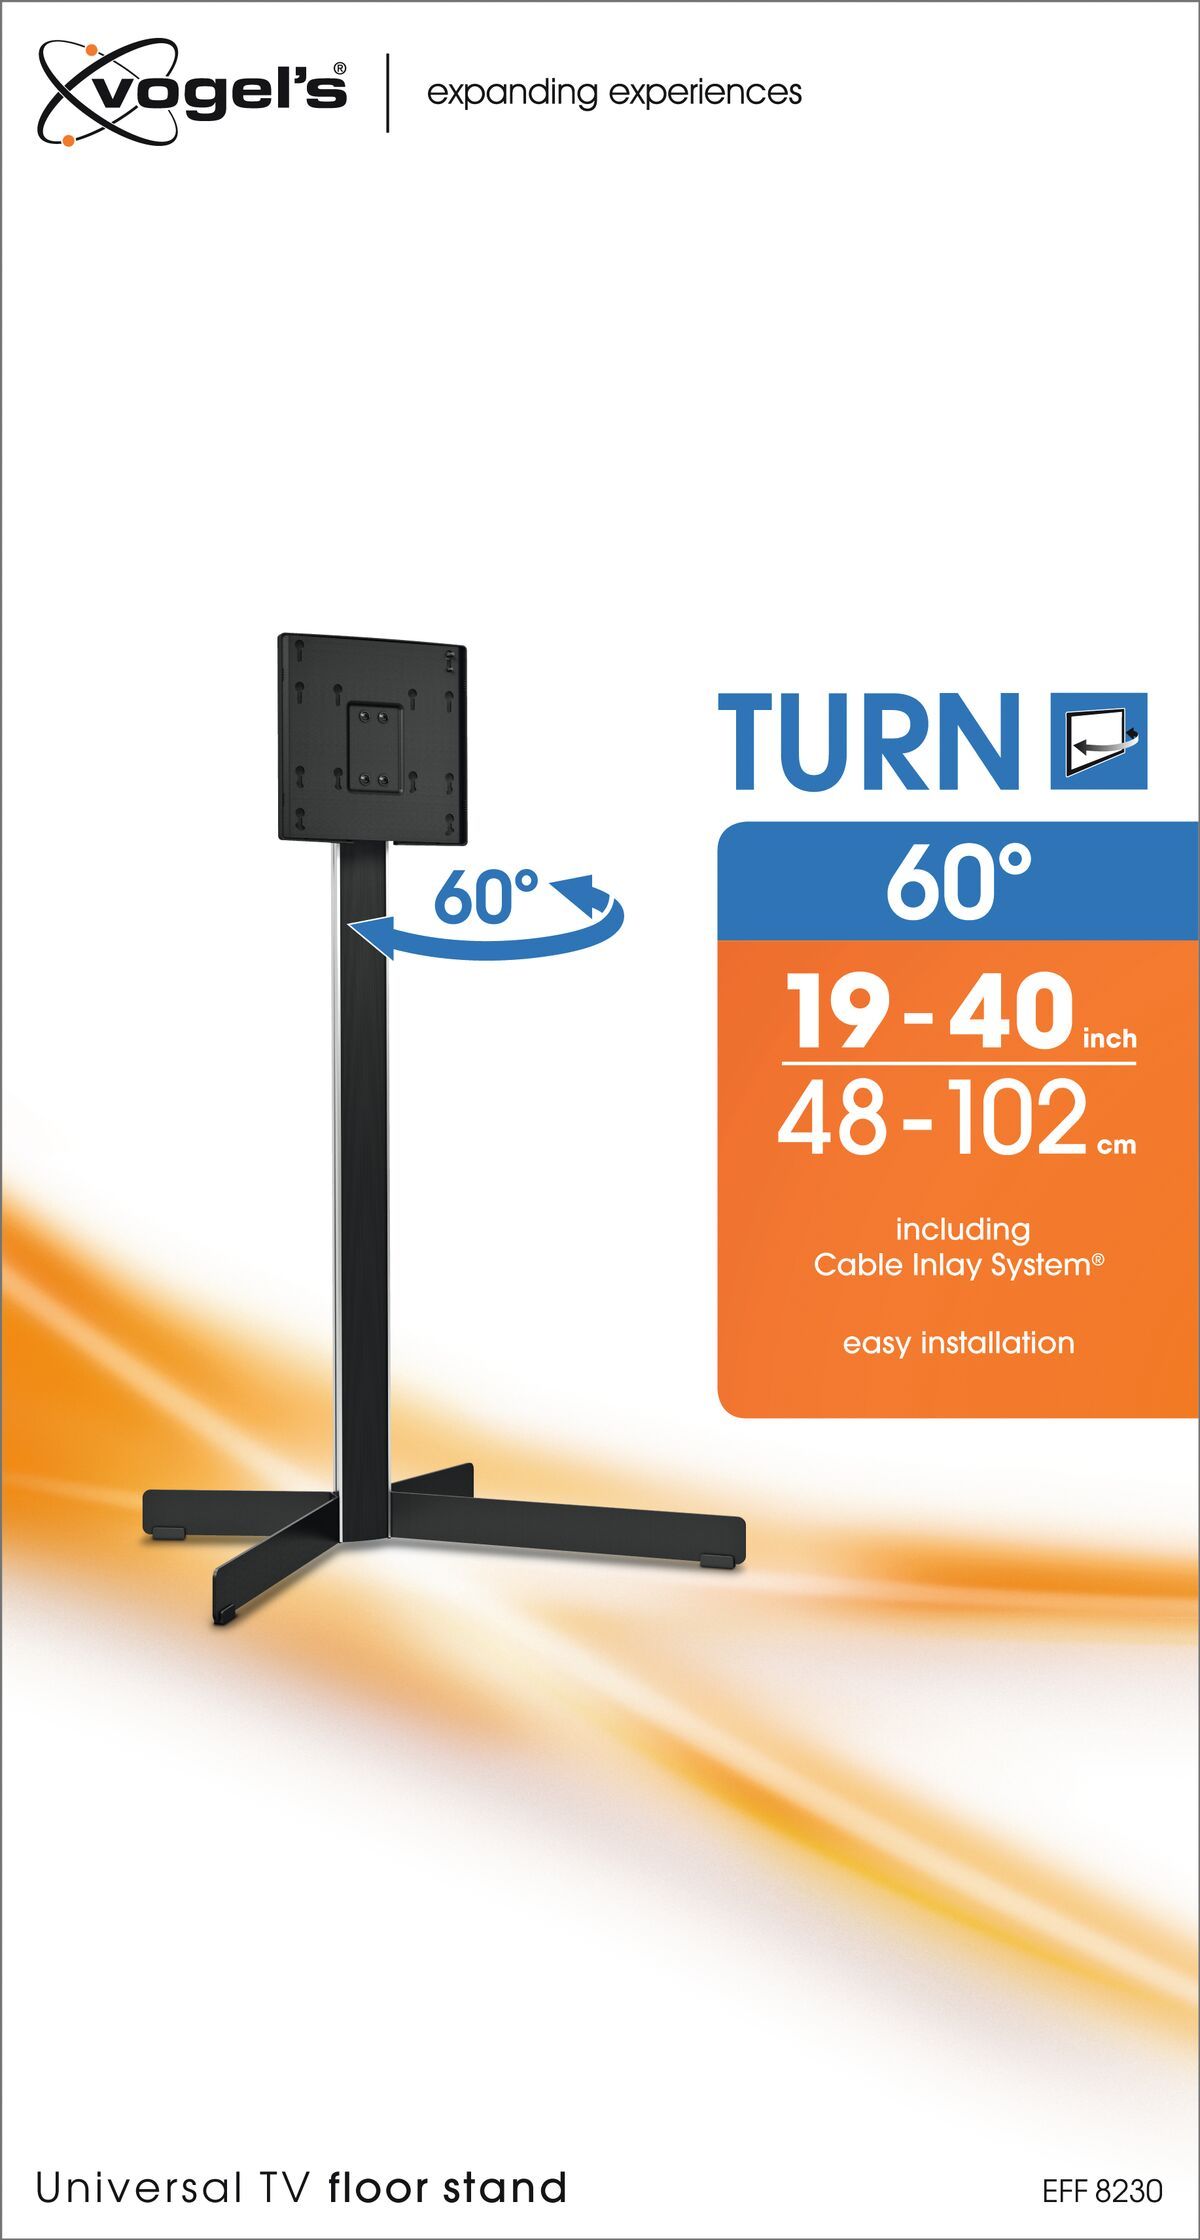 Vogel's EFF 8230 TV Floor Stand - Suitable for 19 up to 40 inch TVs up to Packaging front